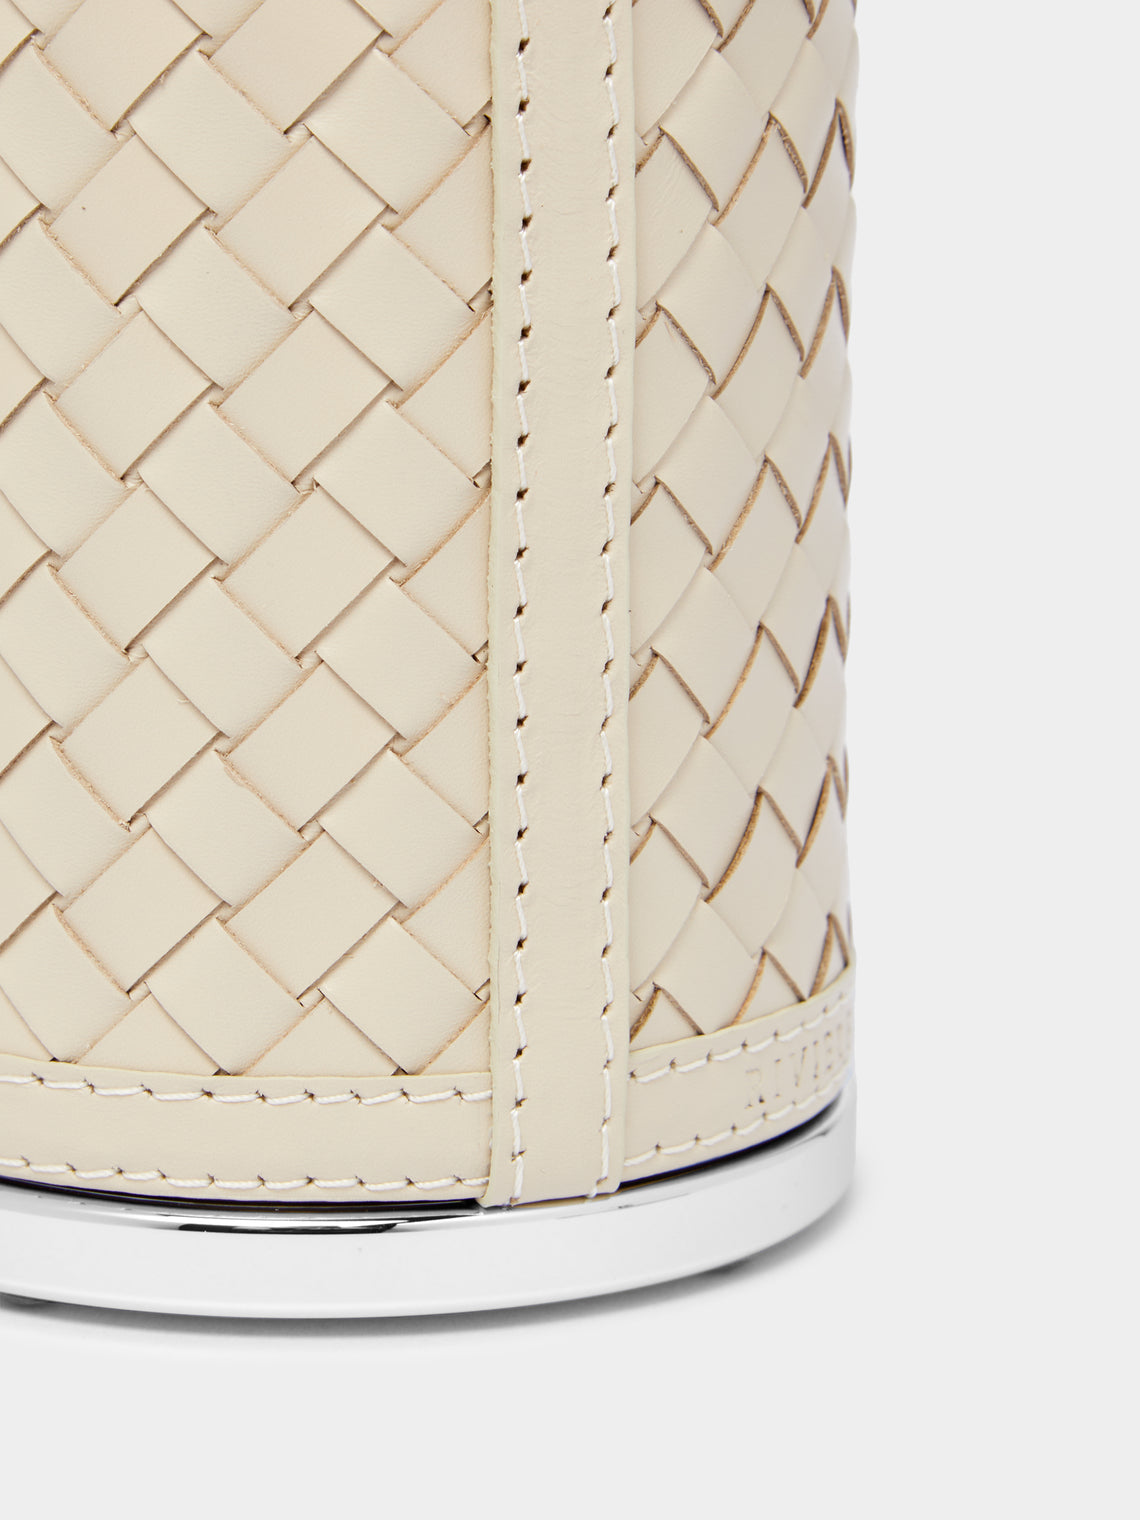 Riviere - Woven Leather Lidded Box -  - ABASK